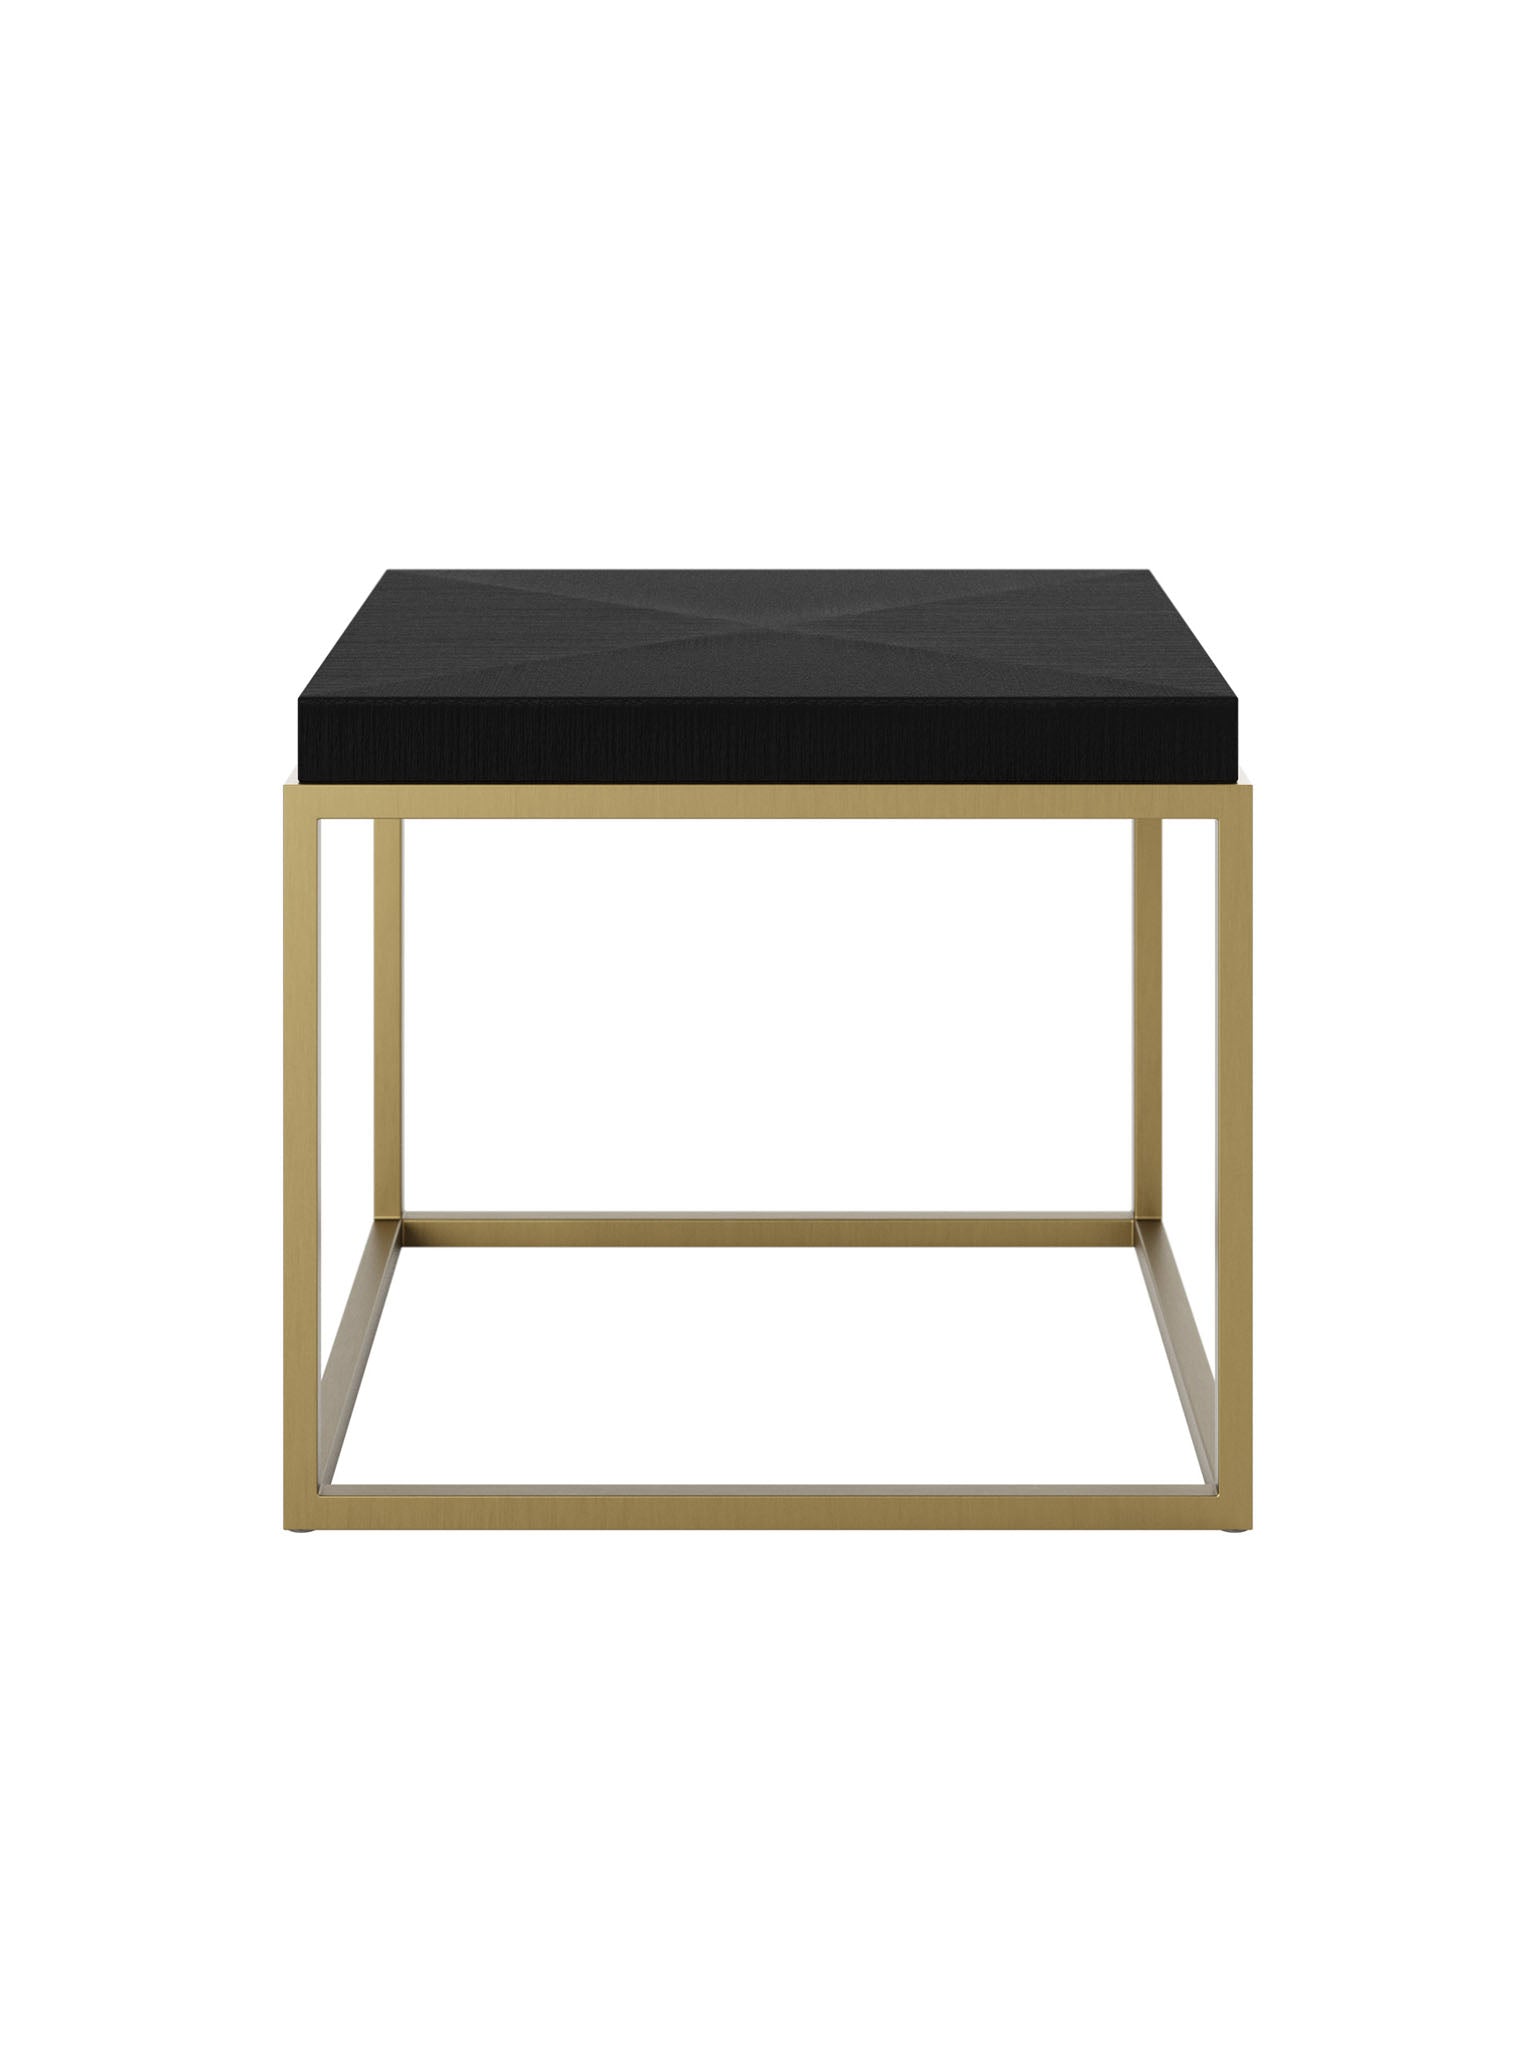 End Table with Brass Style Accents